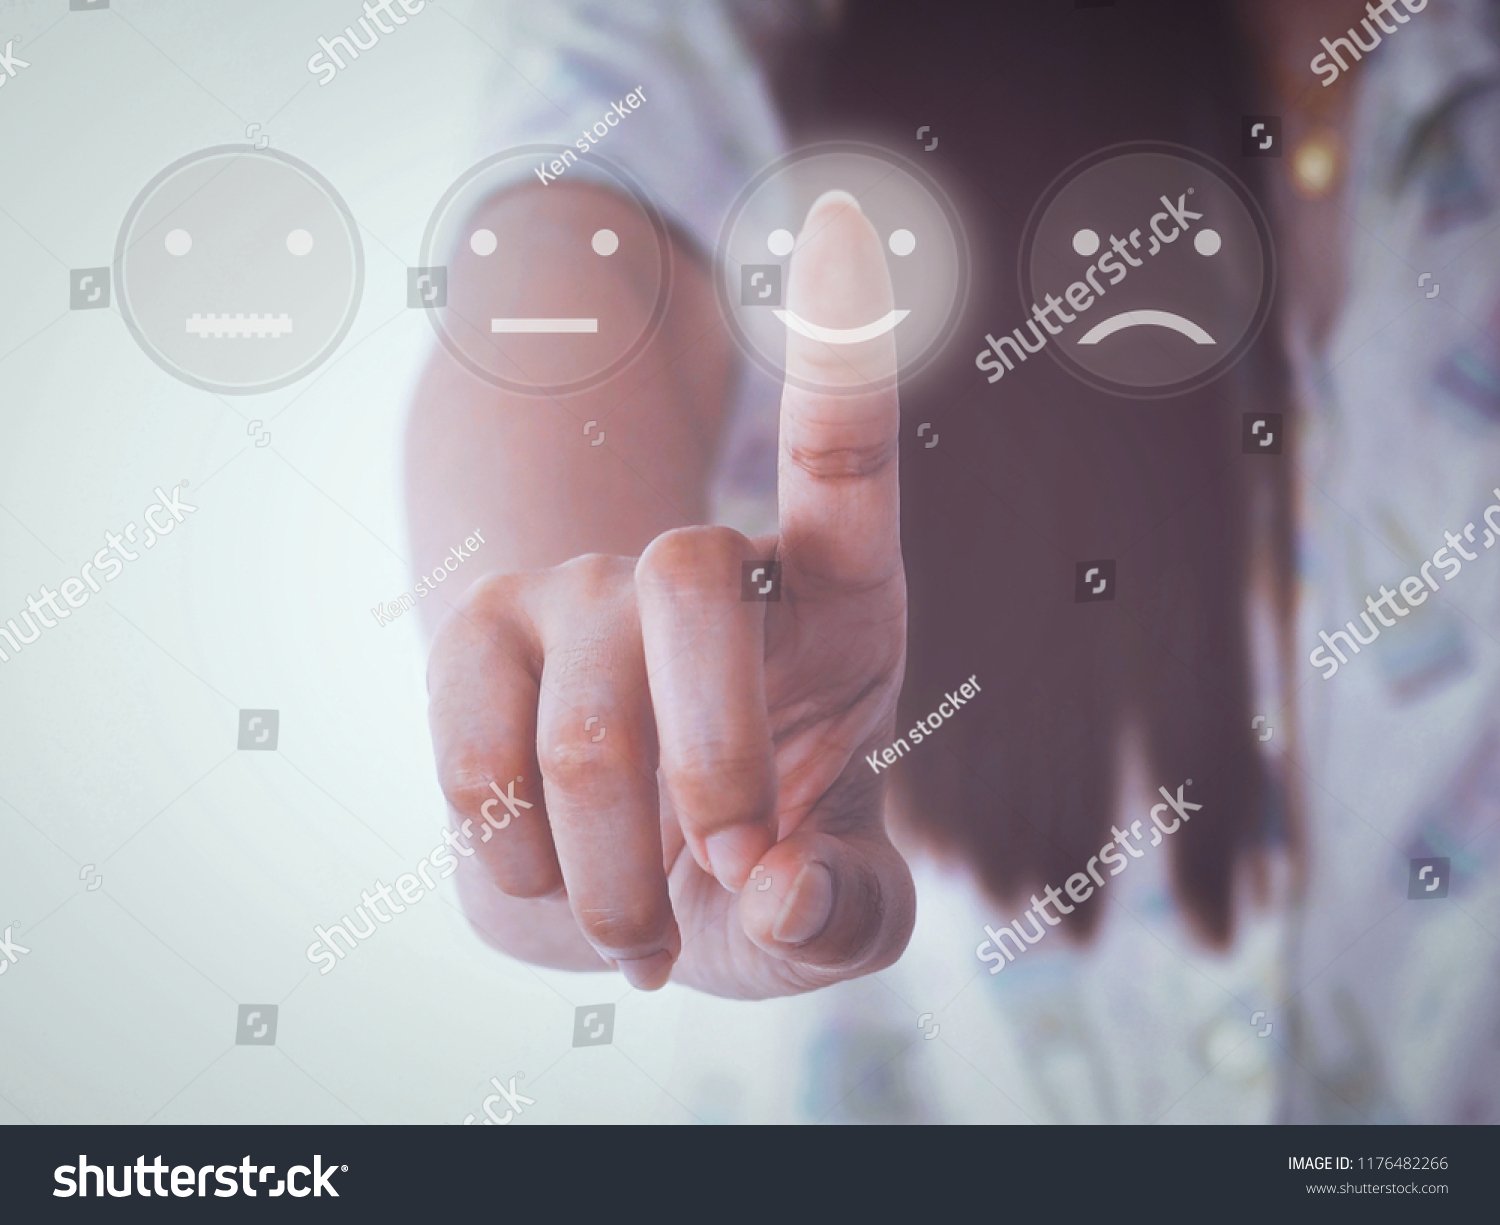 stock-photo-hand-women-pressing-smile-buttons-on-virtual-touch-screen-1176482266